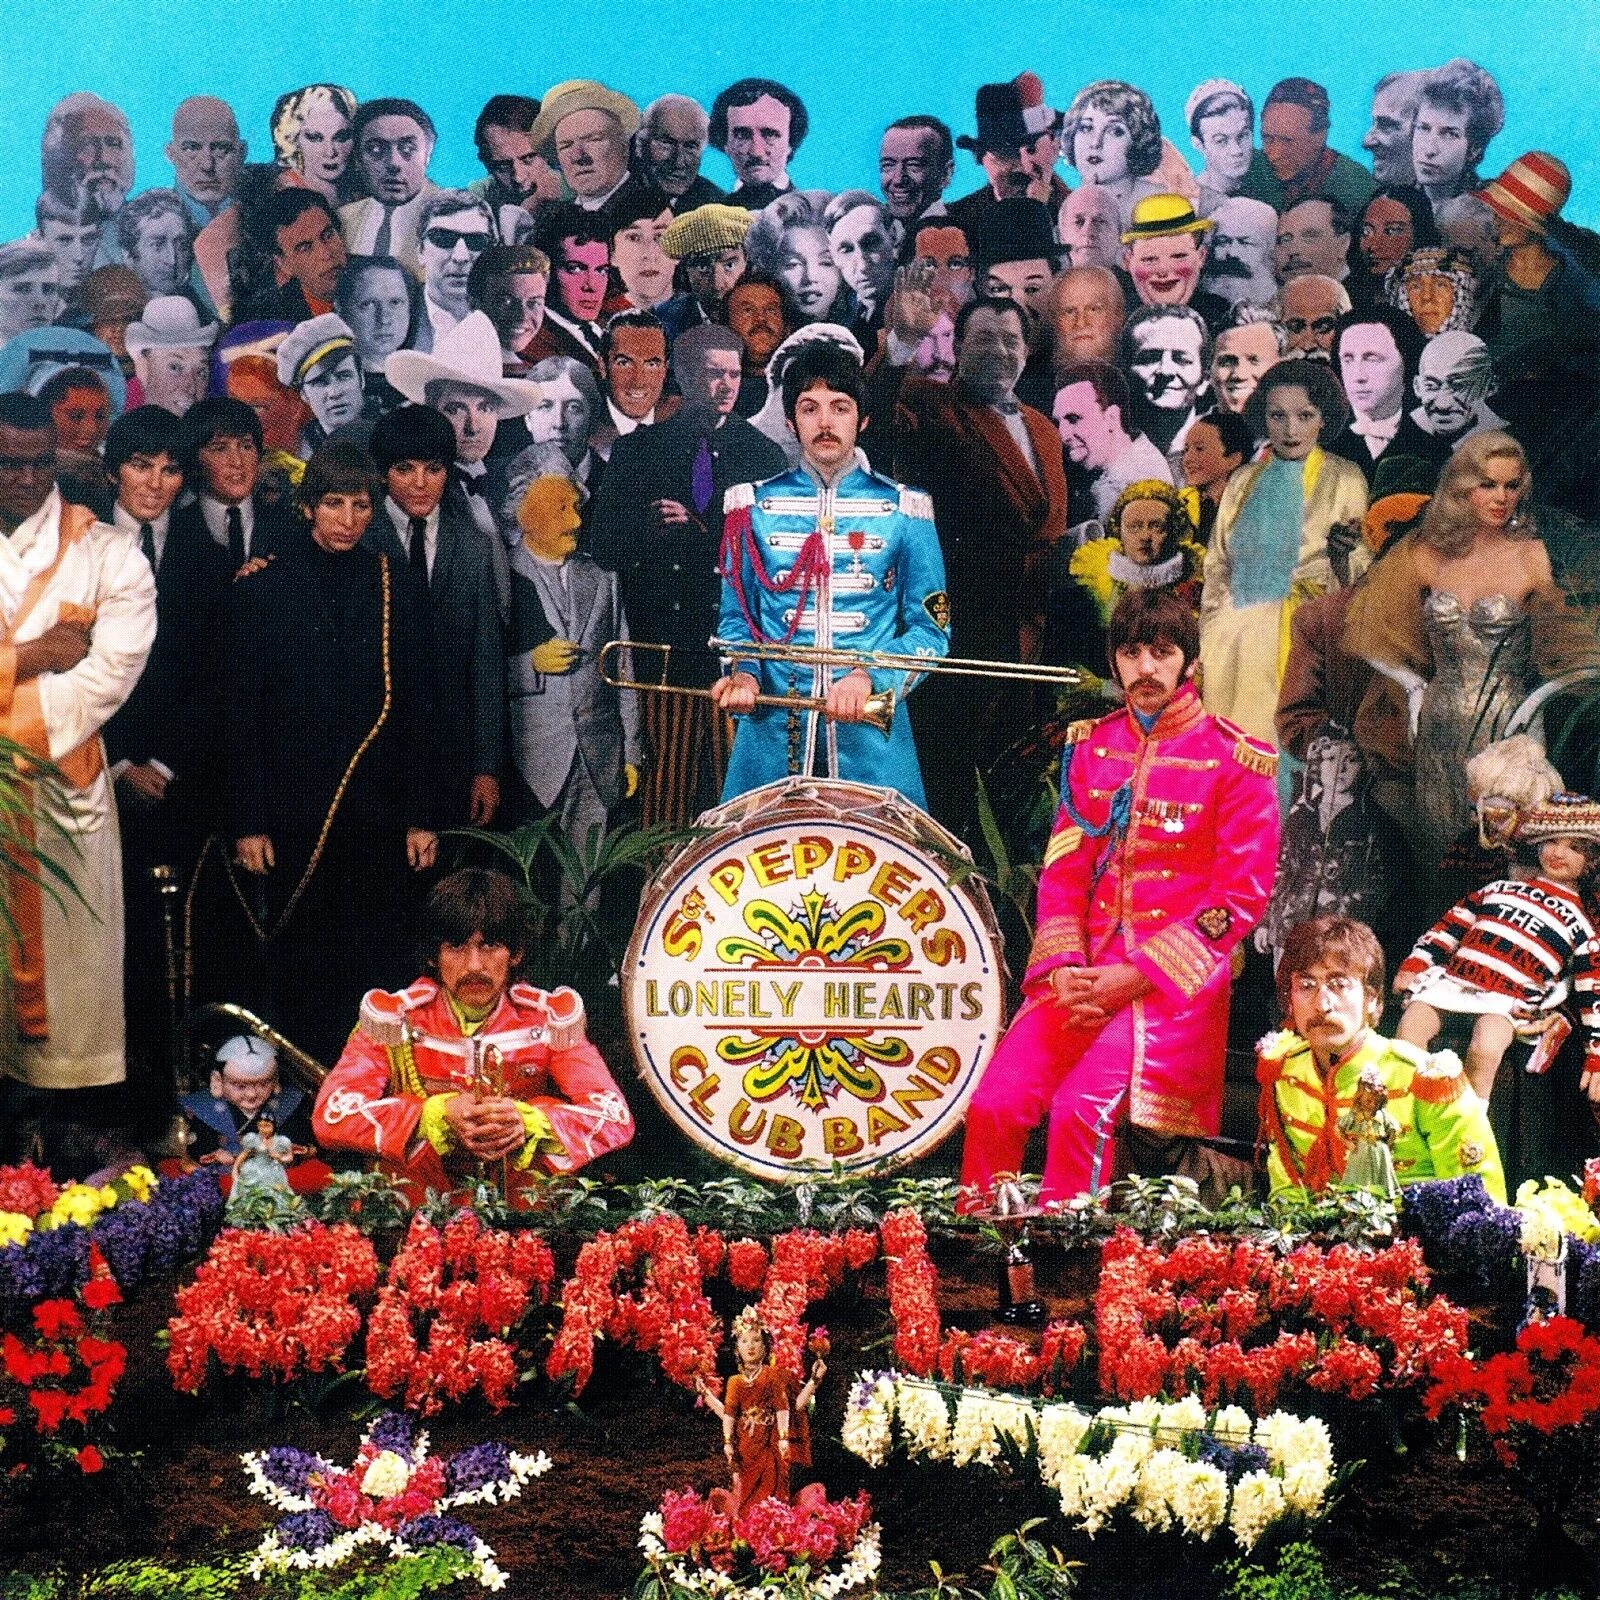 Beatles sgt peppers lonely hearts club. The Beatles Sgt. Pepper`s Lonely Hearts Club Band 1967. The Beatles сержант Пеппер. Sgt. Pepper’s Lonely Hearts Club Band the Beatles. Sgt Pepper's Lonely Hearts Club Band.